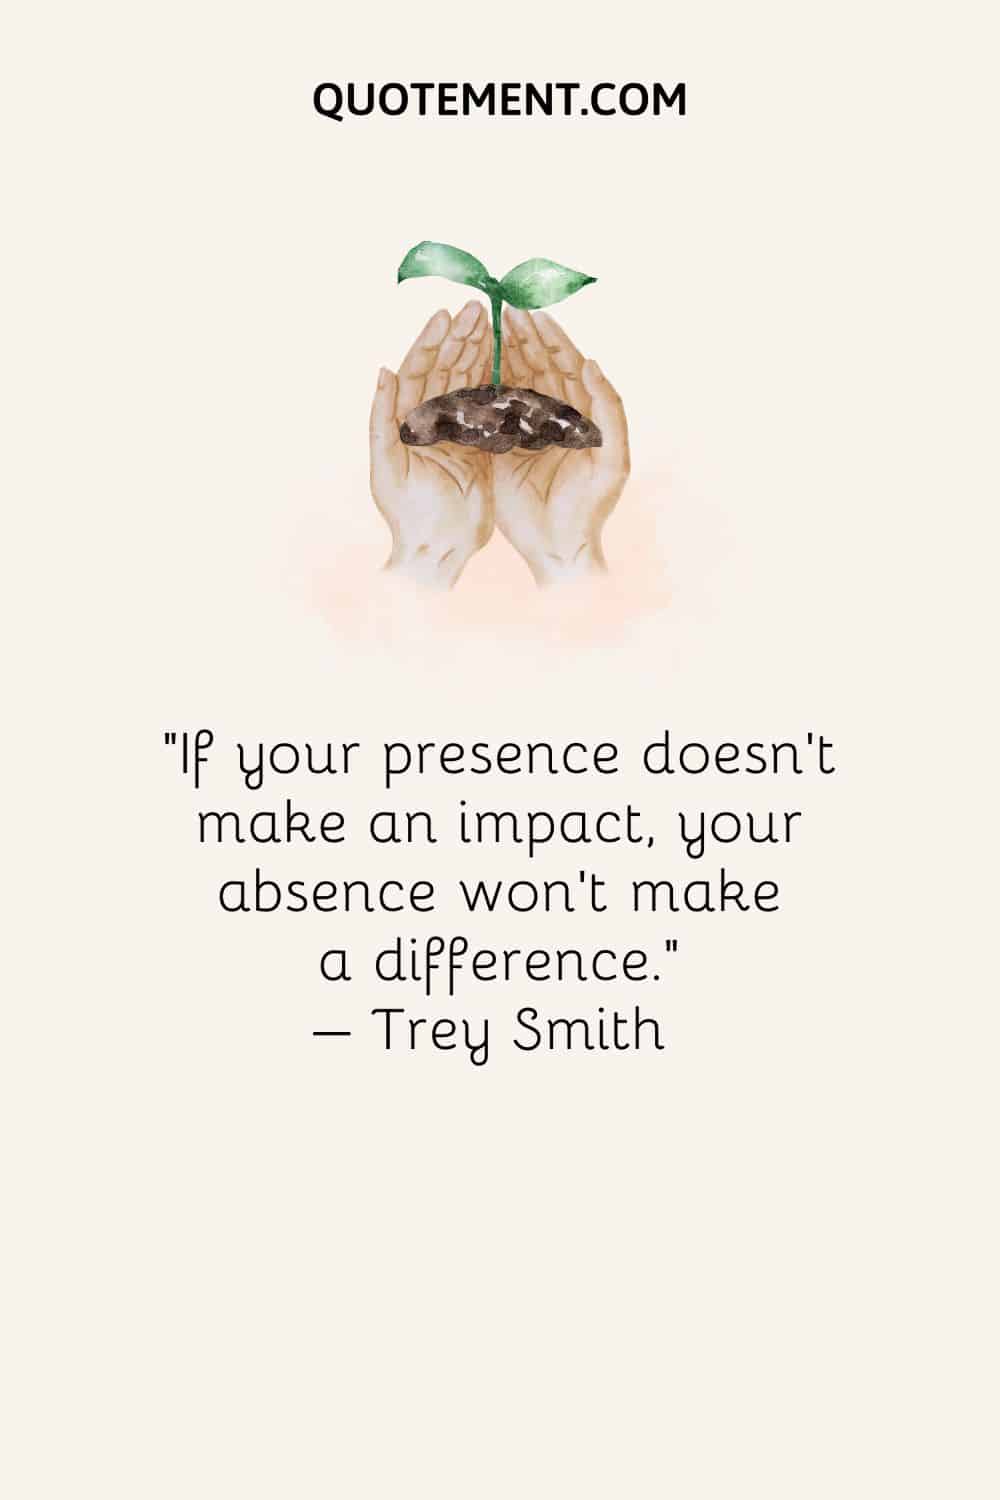 If your presence doesn’t make an impact, your absence won’t make a difference